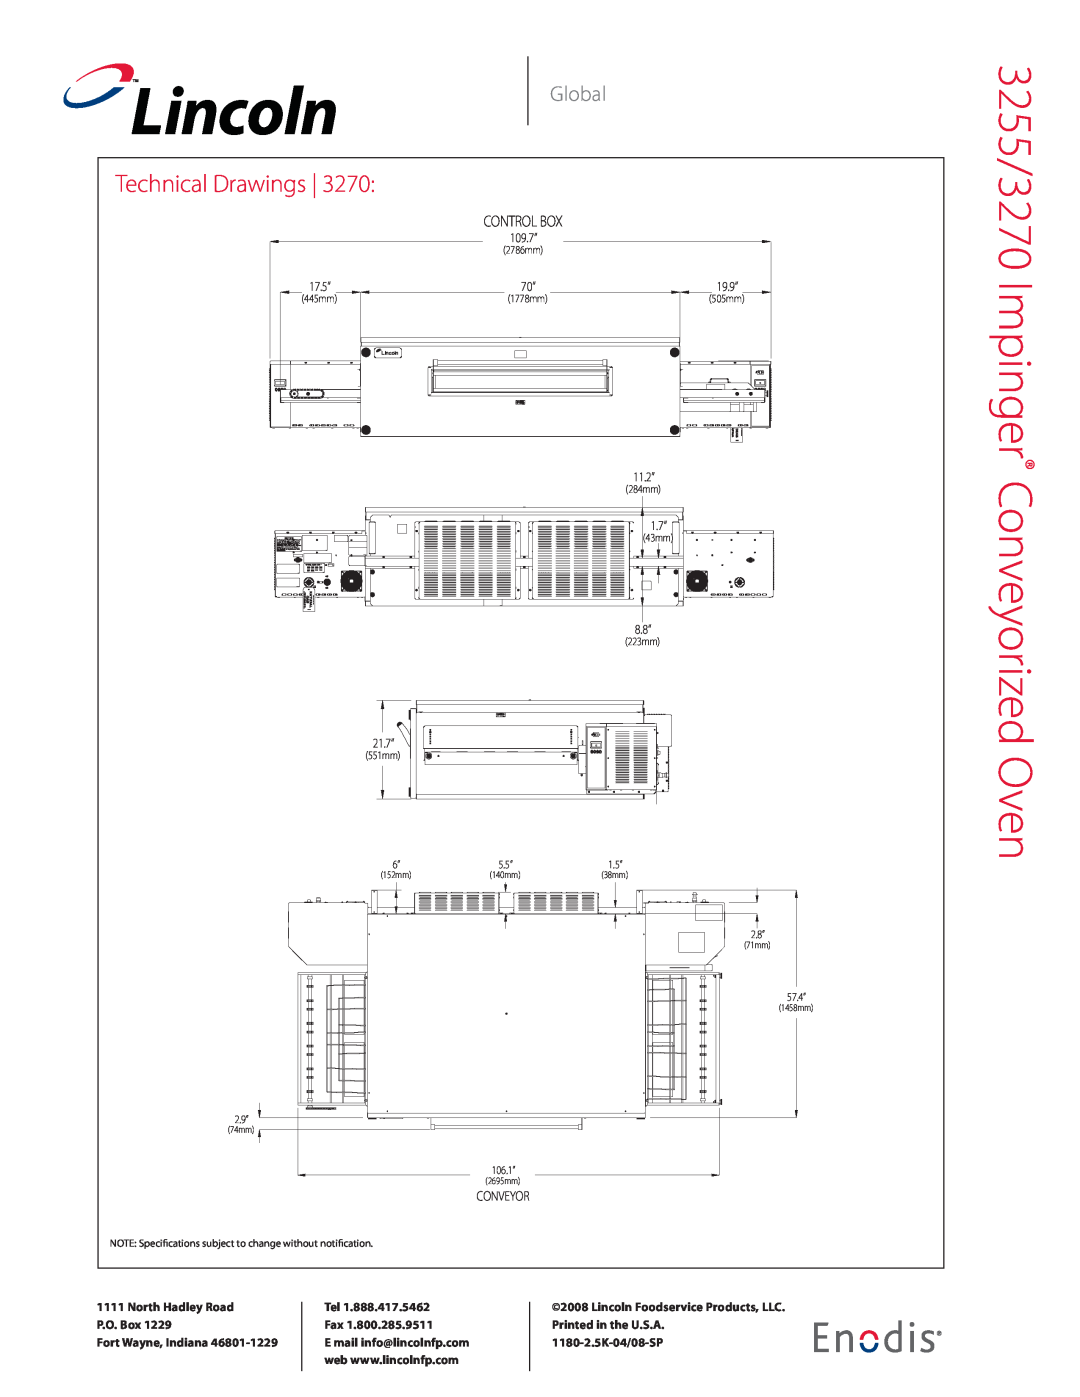 Lincoln manual 3255/3270 Impinger Conveyorized Oven, Lincoln, Technical Drawings, Global, Control Box 